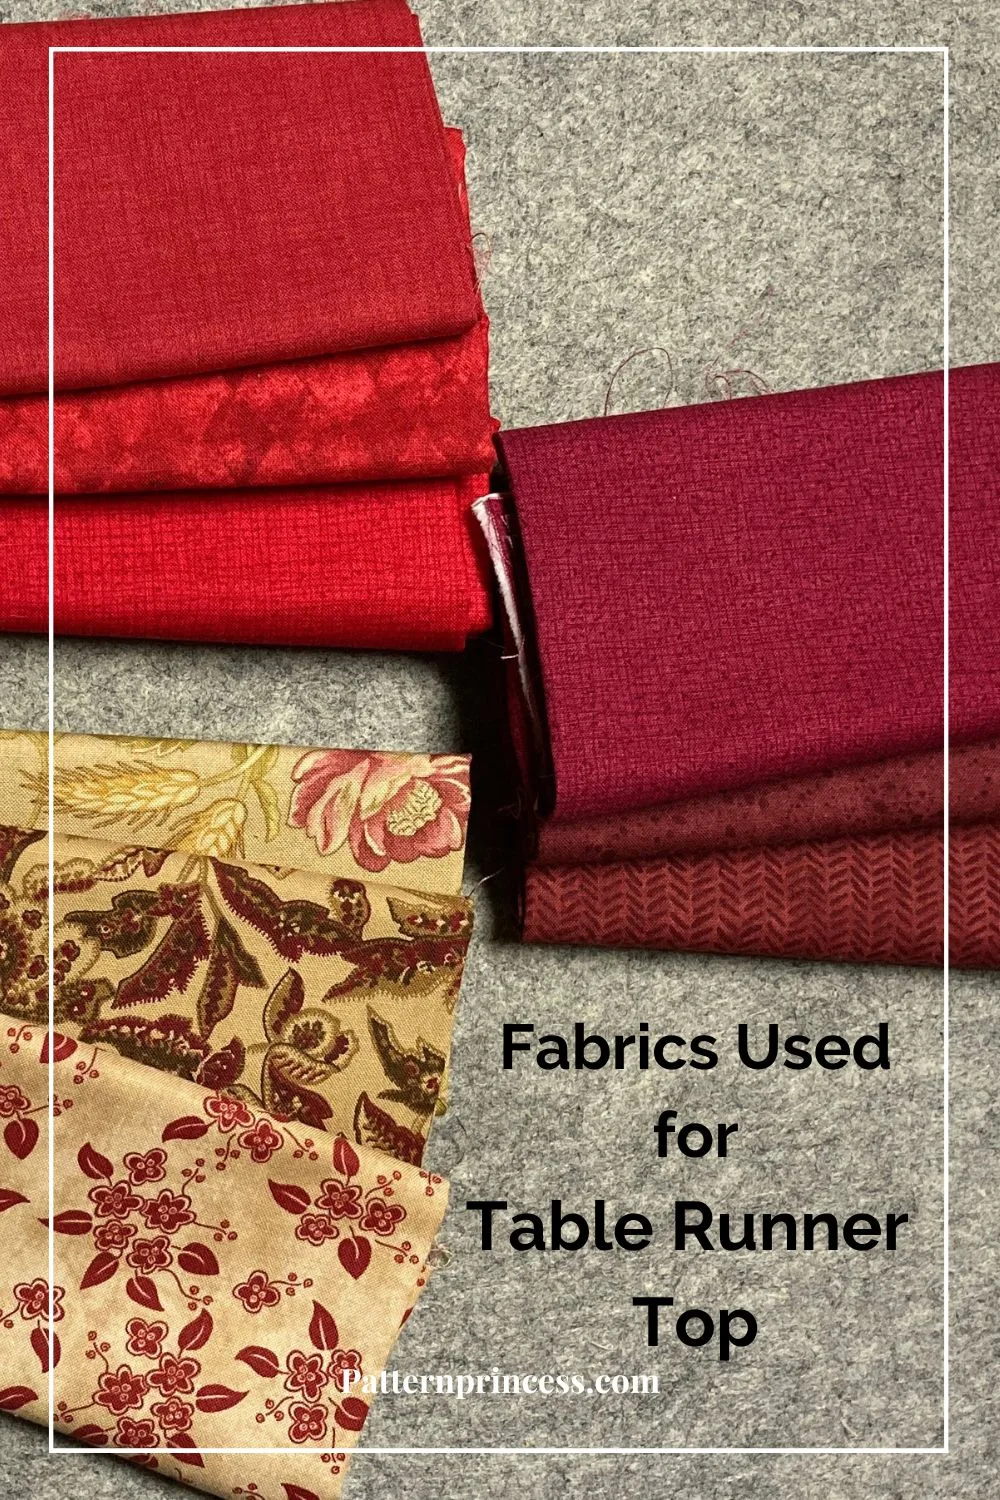 Fabrics Used for Table Runner Top